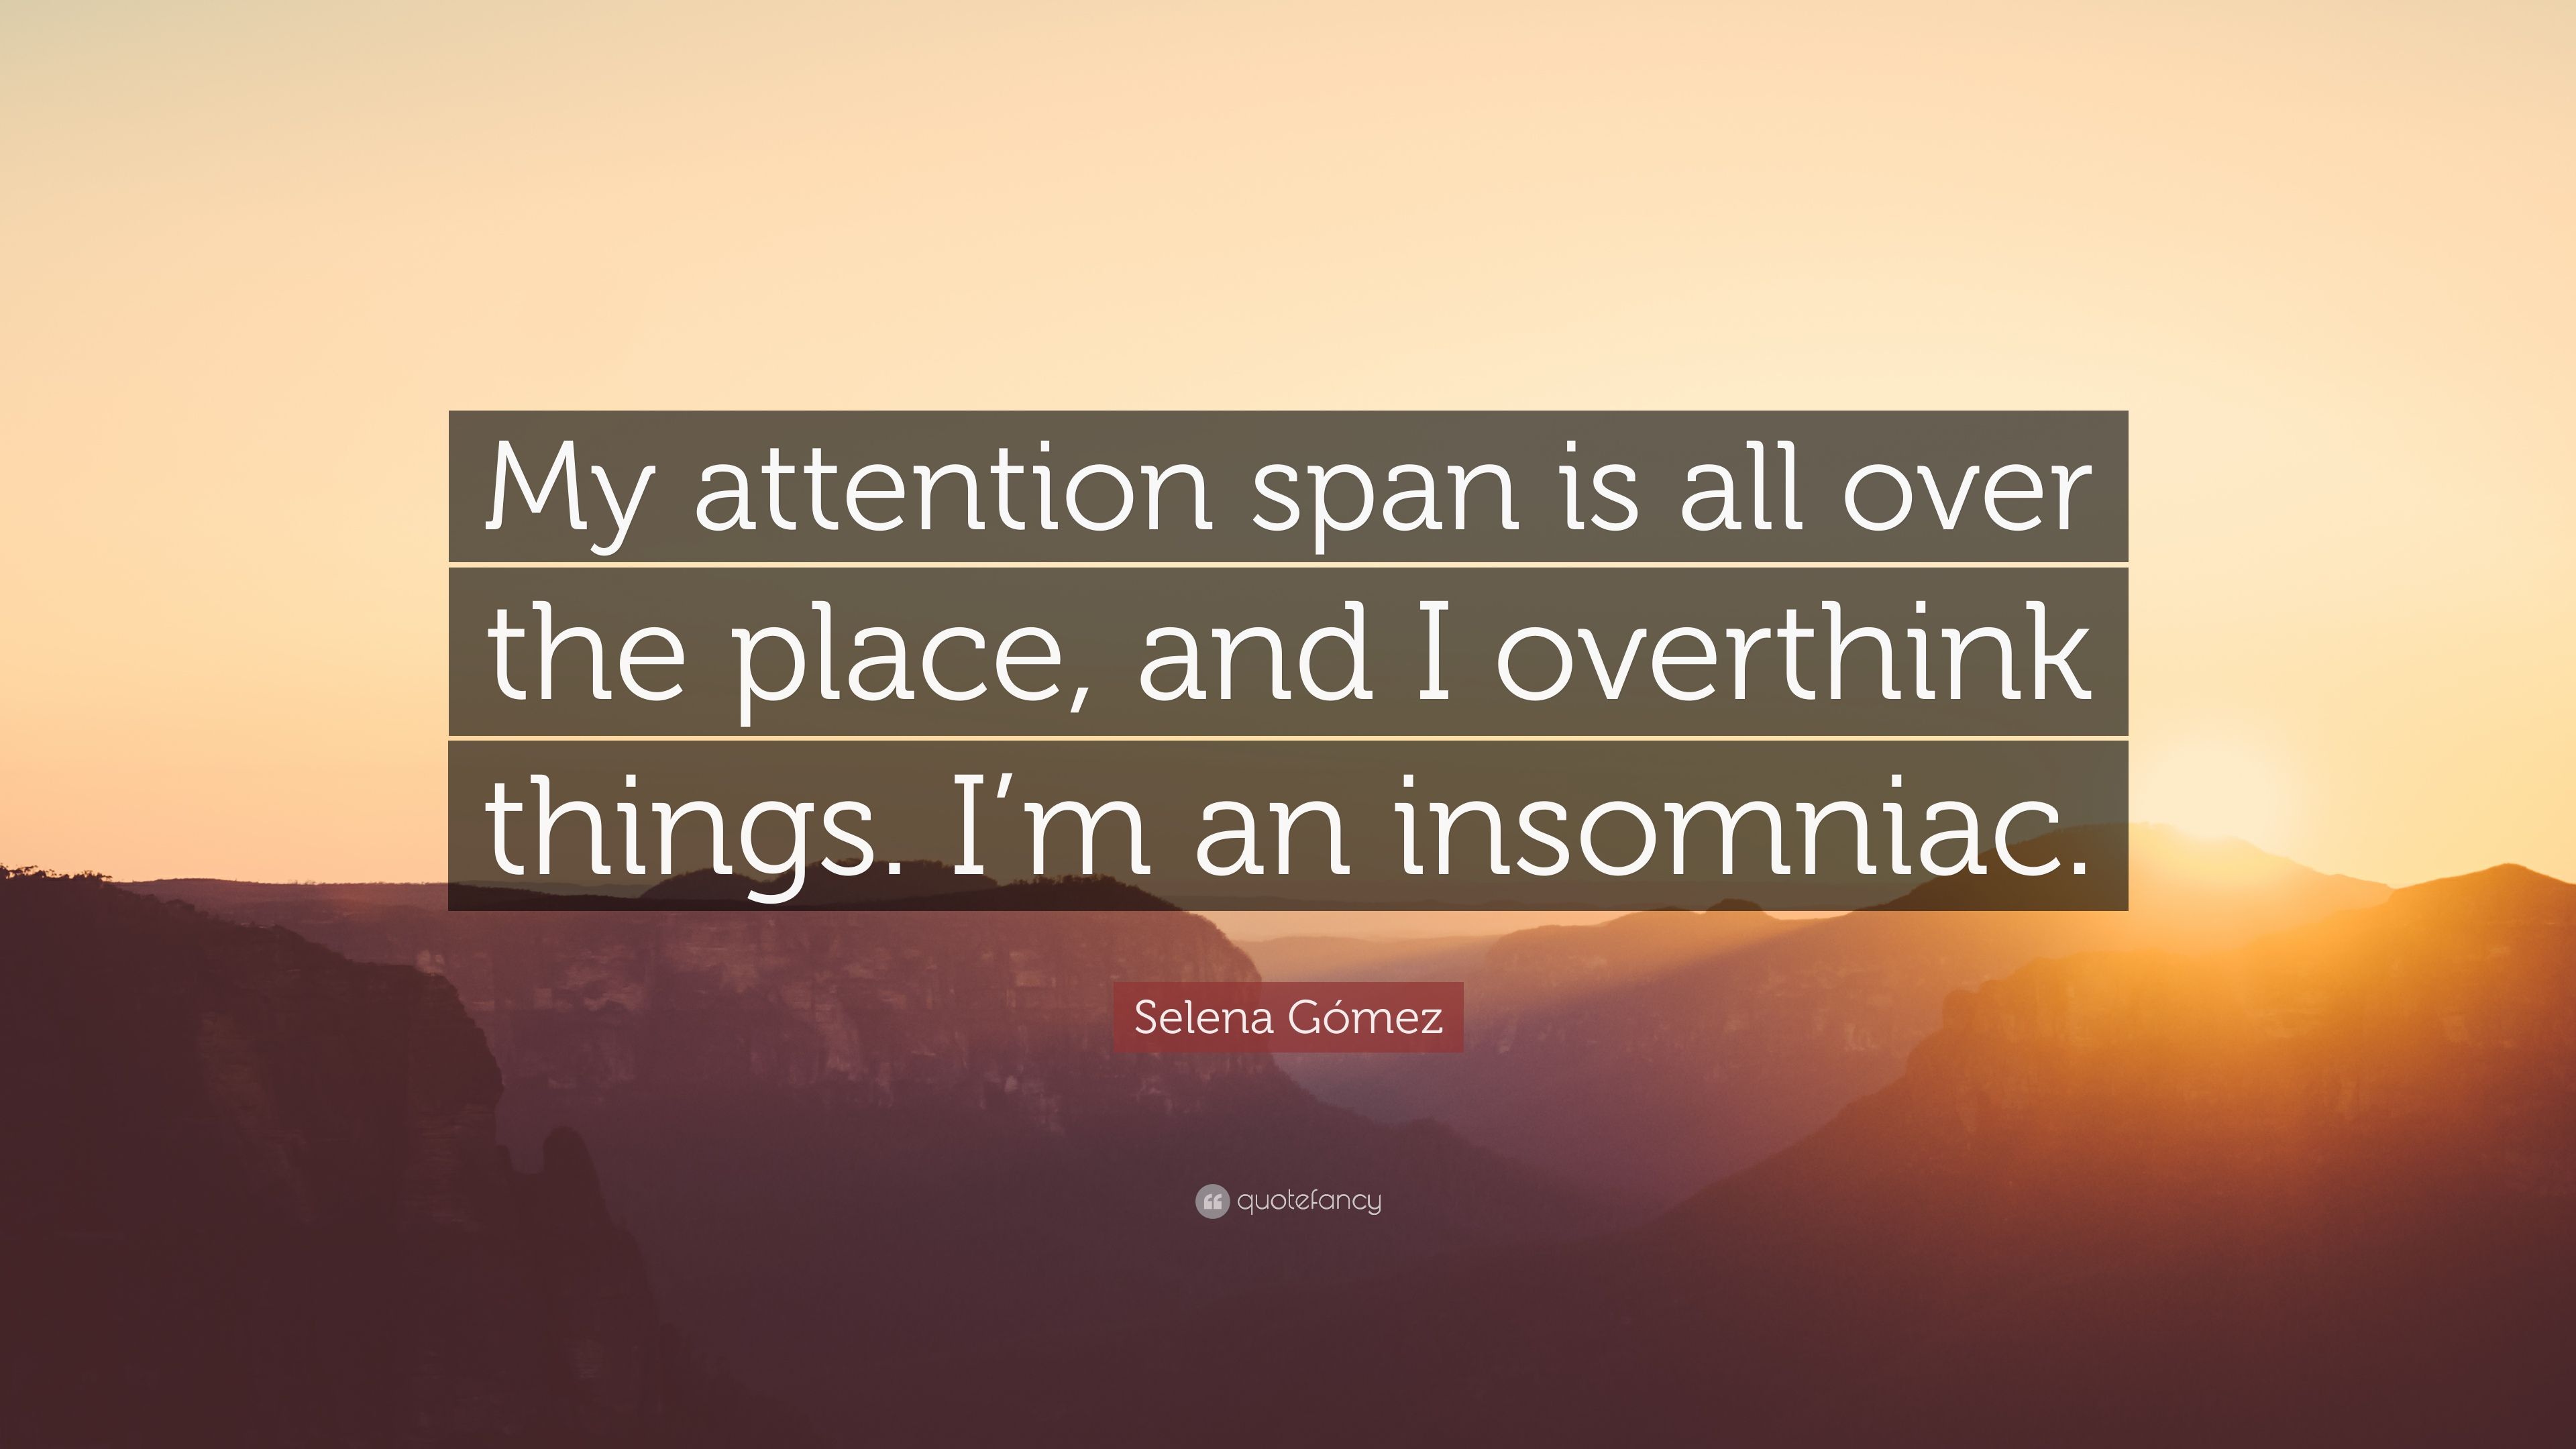 Selena Gómez Quote: “My attention span is all over the place